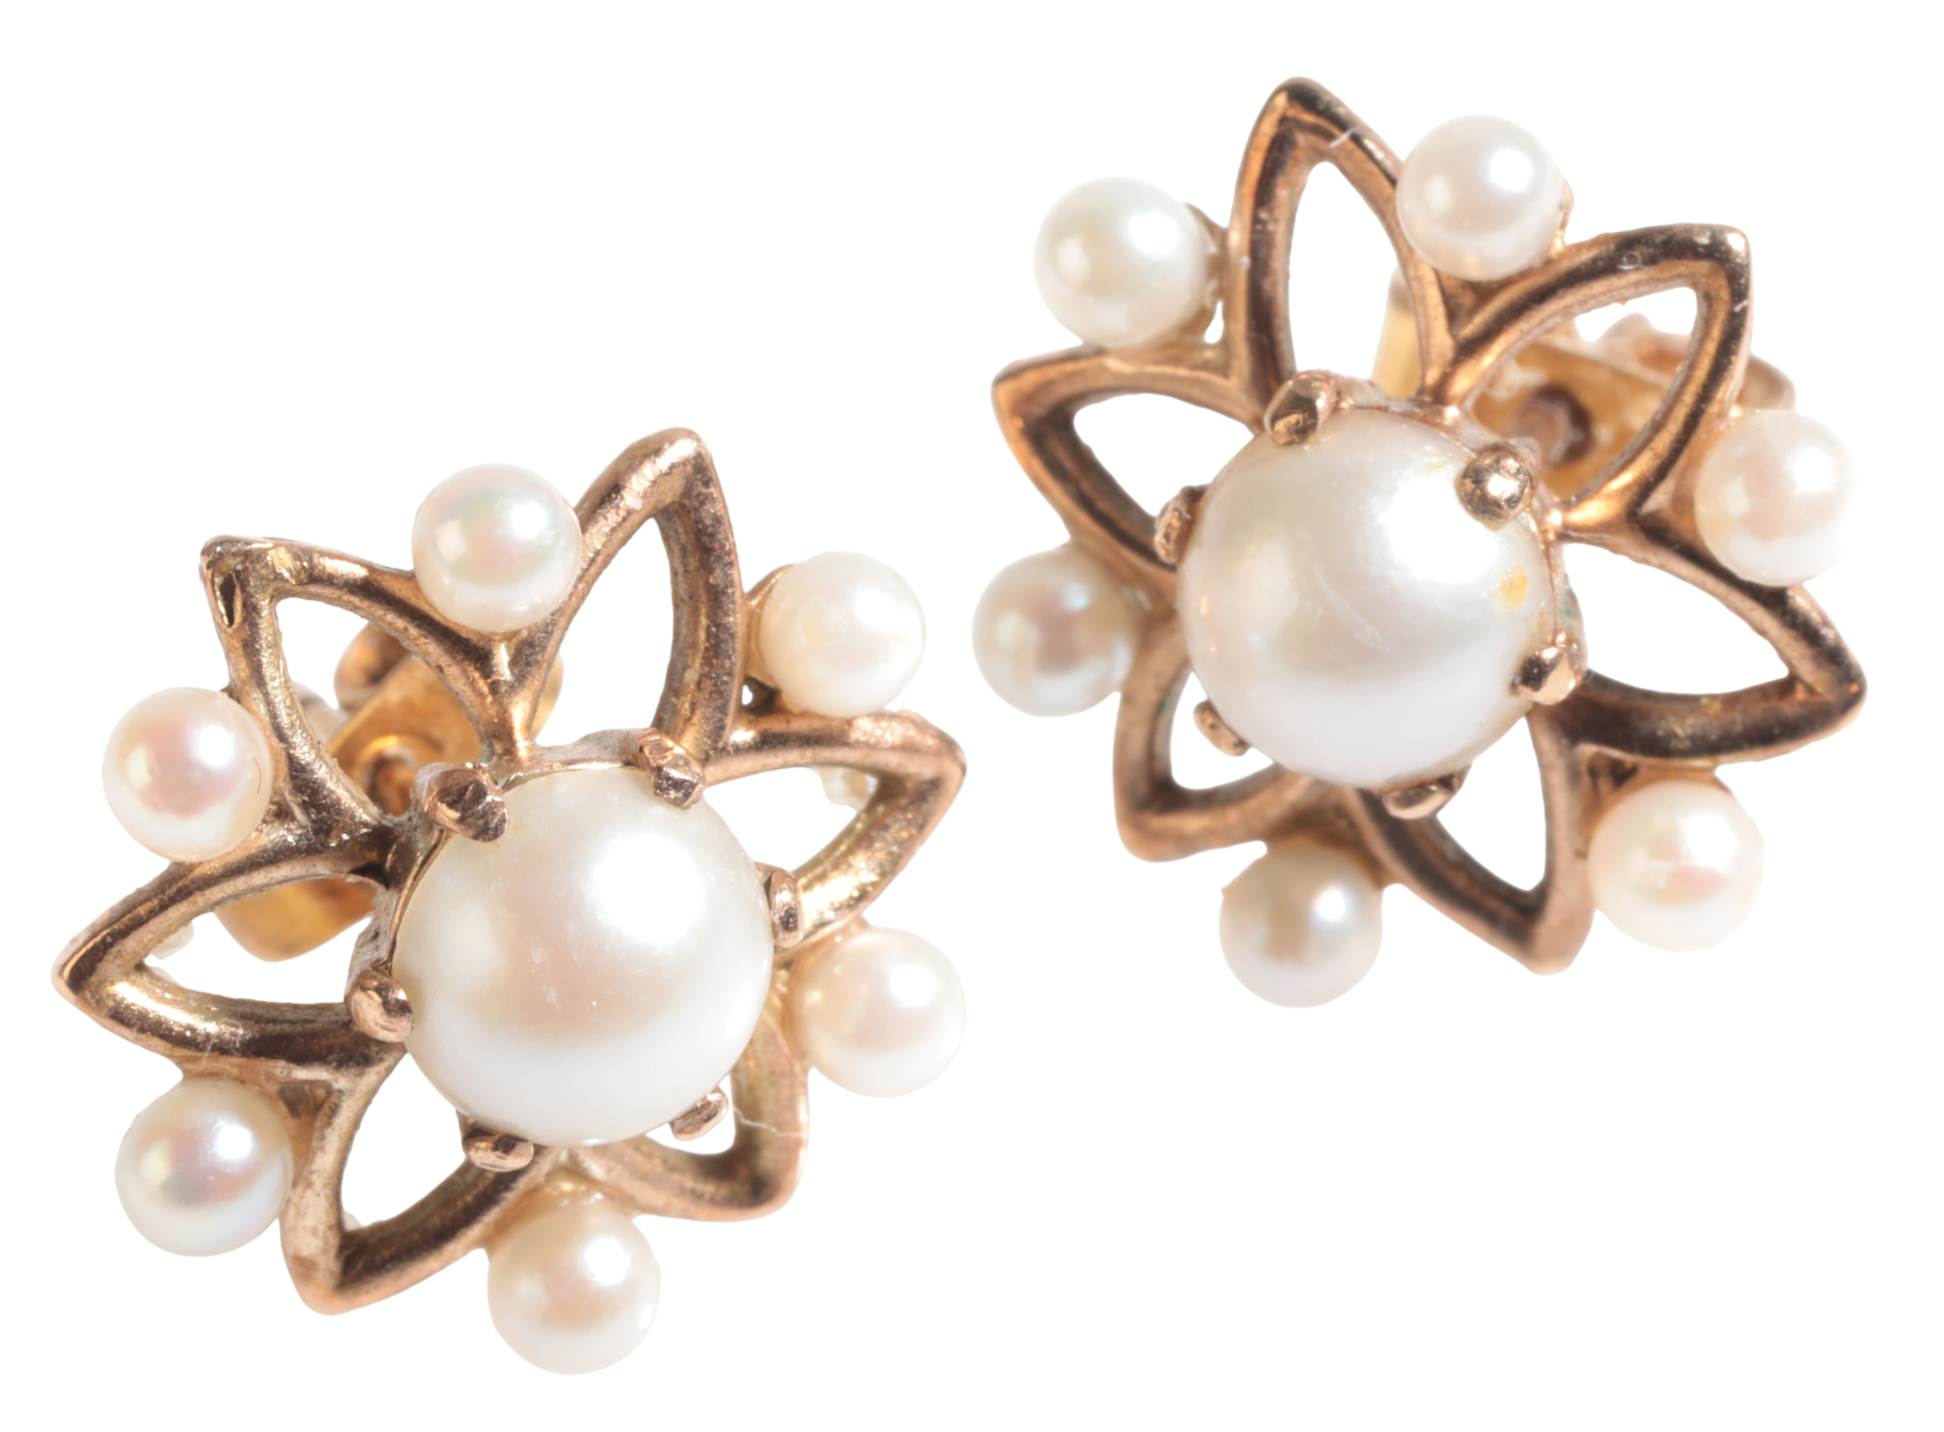 A PAIR OF 9CT GOLD AND PEARL EARRINGS